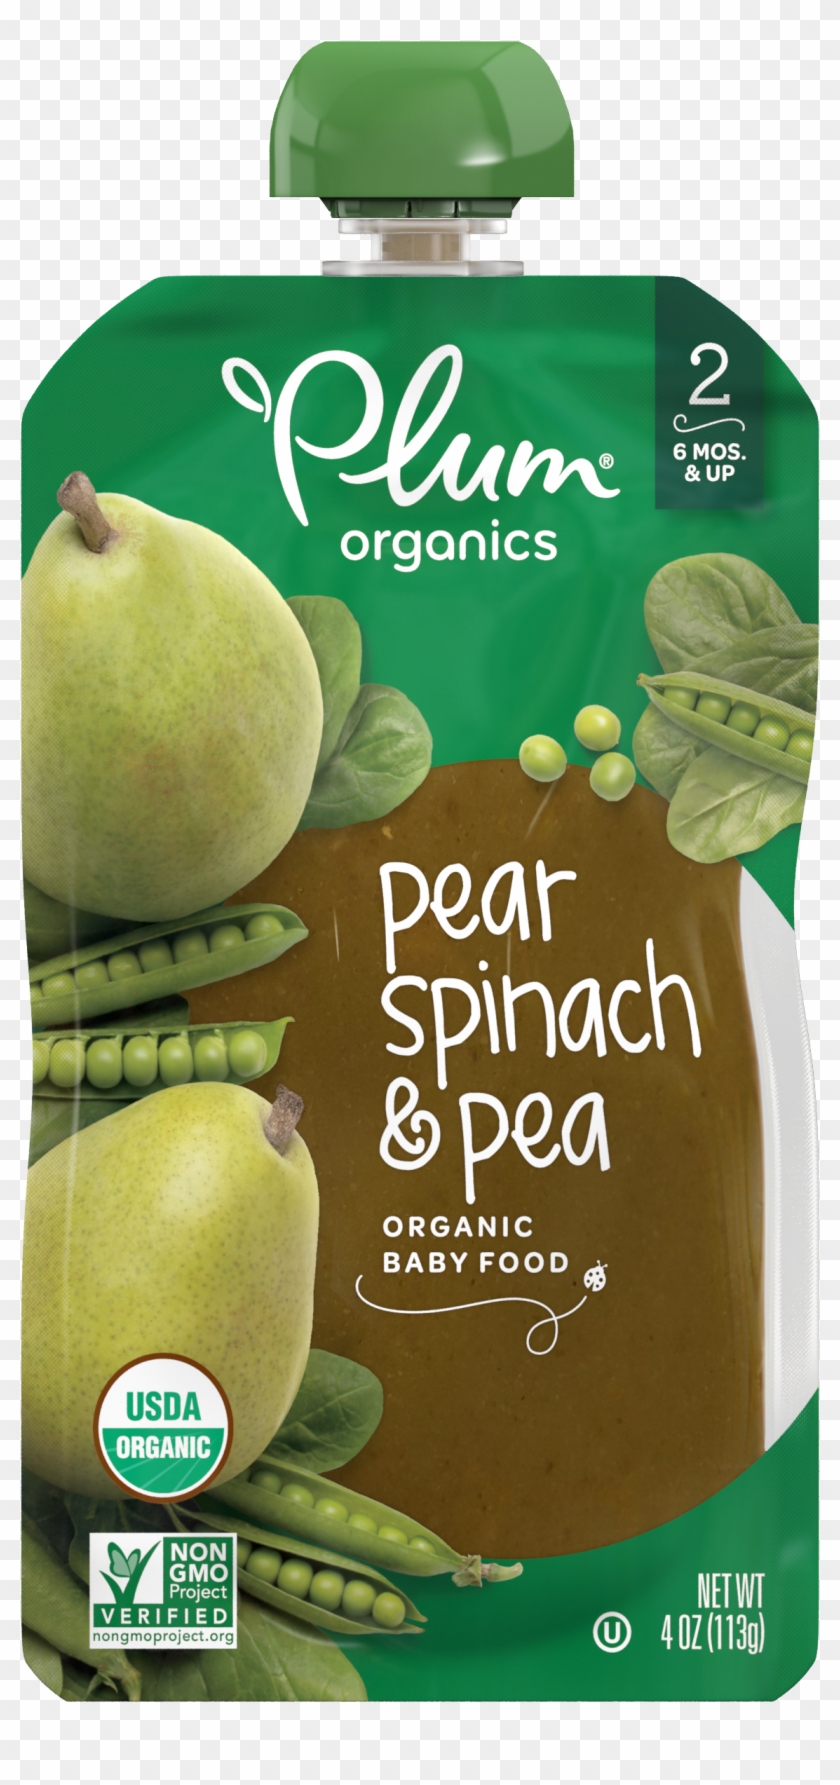 Pear, Spinach & Pea - Plums Baby Food Clipart #854790